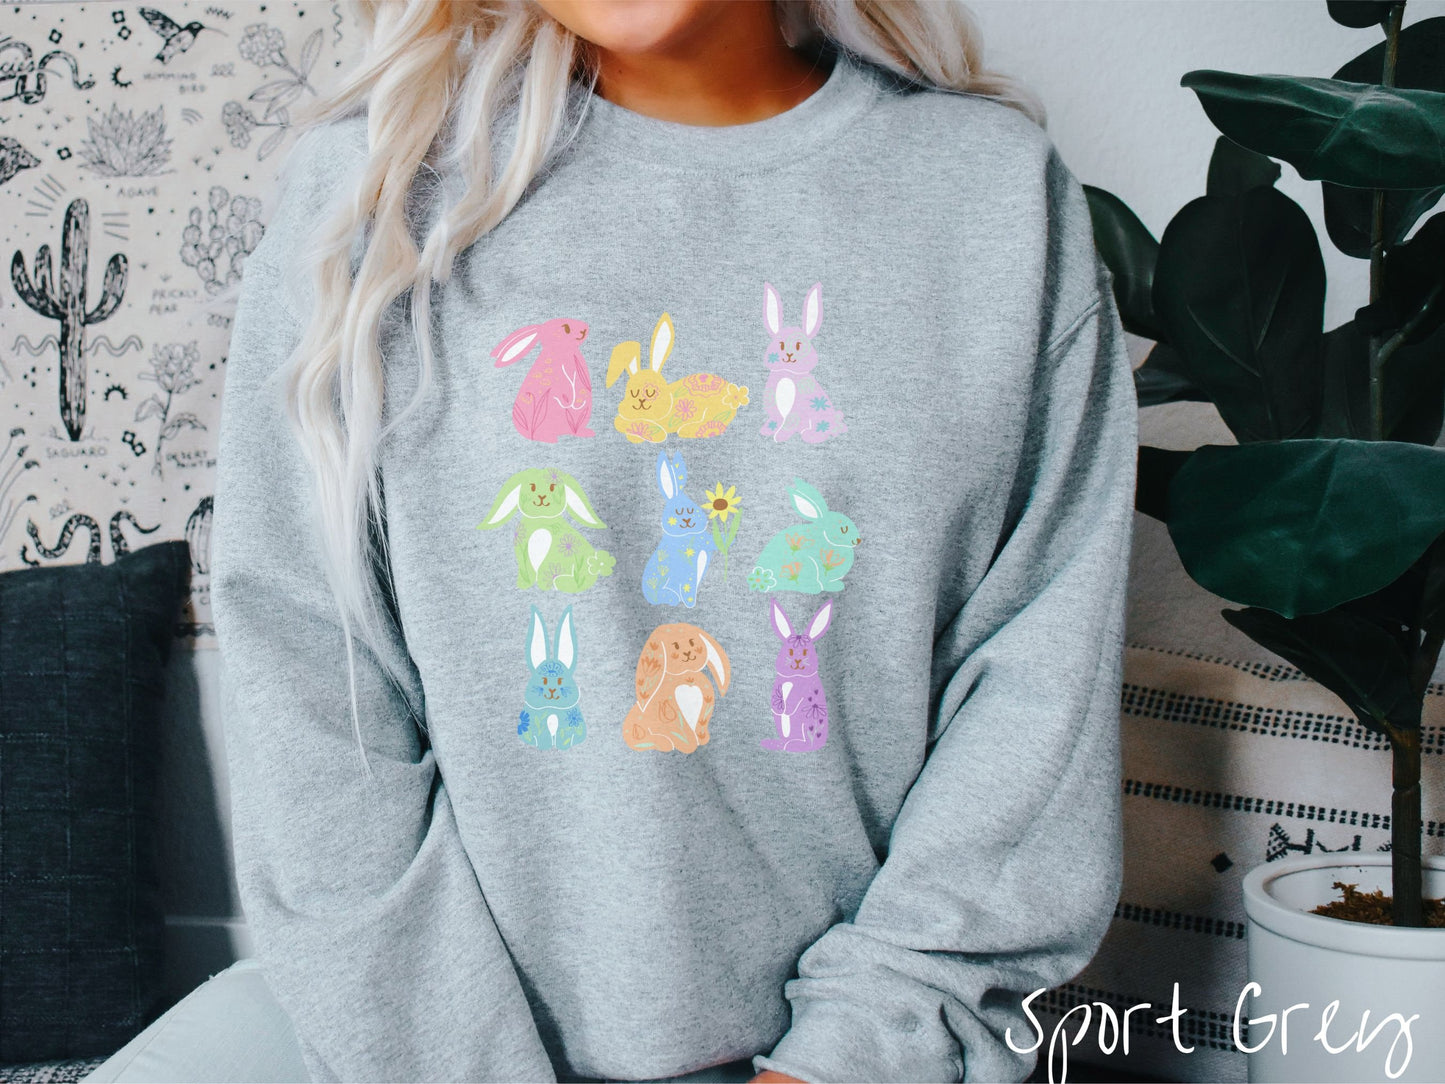 A woman wearing a cute, vintage sport grey colored sweatshirt with a three by three grid of colorful bunny rabbits. They are from left to right pink, yellow, purple, green, blue, seafoam, light blue, orange, and purple with flowers near them.